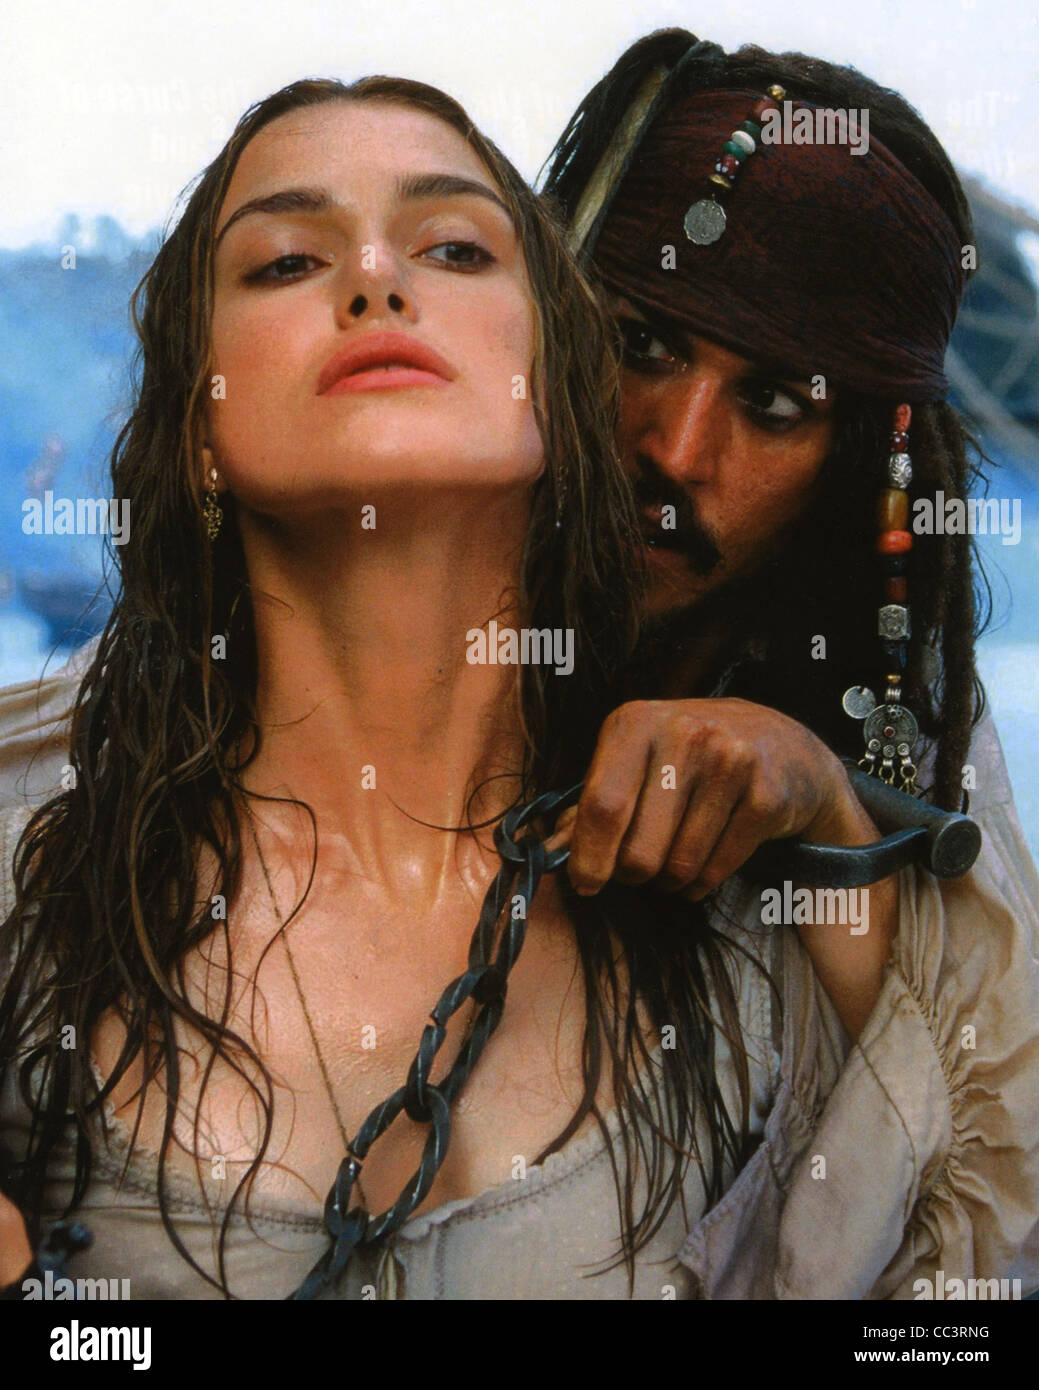 PIRATES OF THE CARIBBEAN : THE CURSE OF THE BLACK PEARL 2003 Bruckheimer/Walt Disney film with Johnny Depp and Keira Knightley Stock Photo